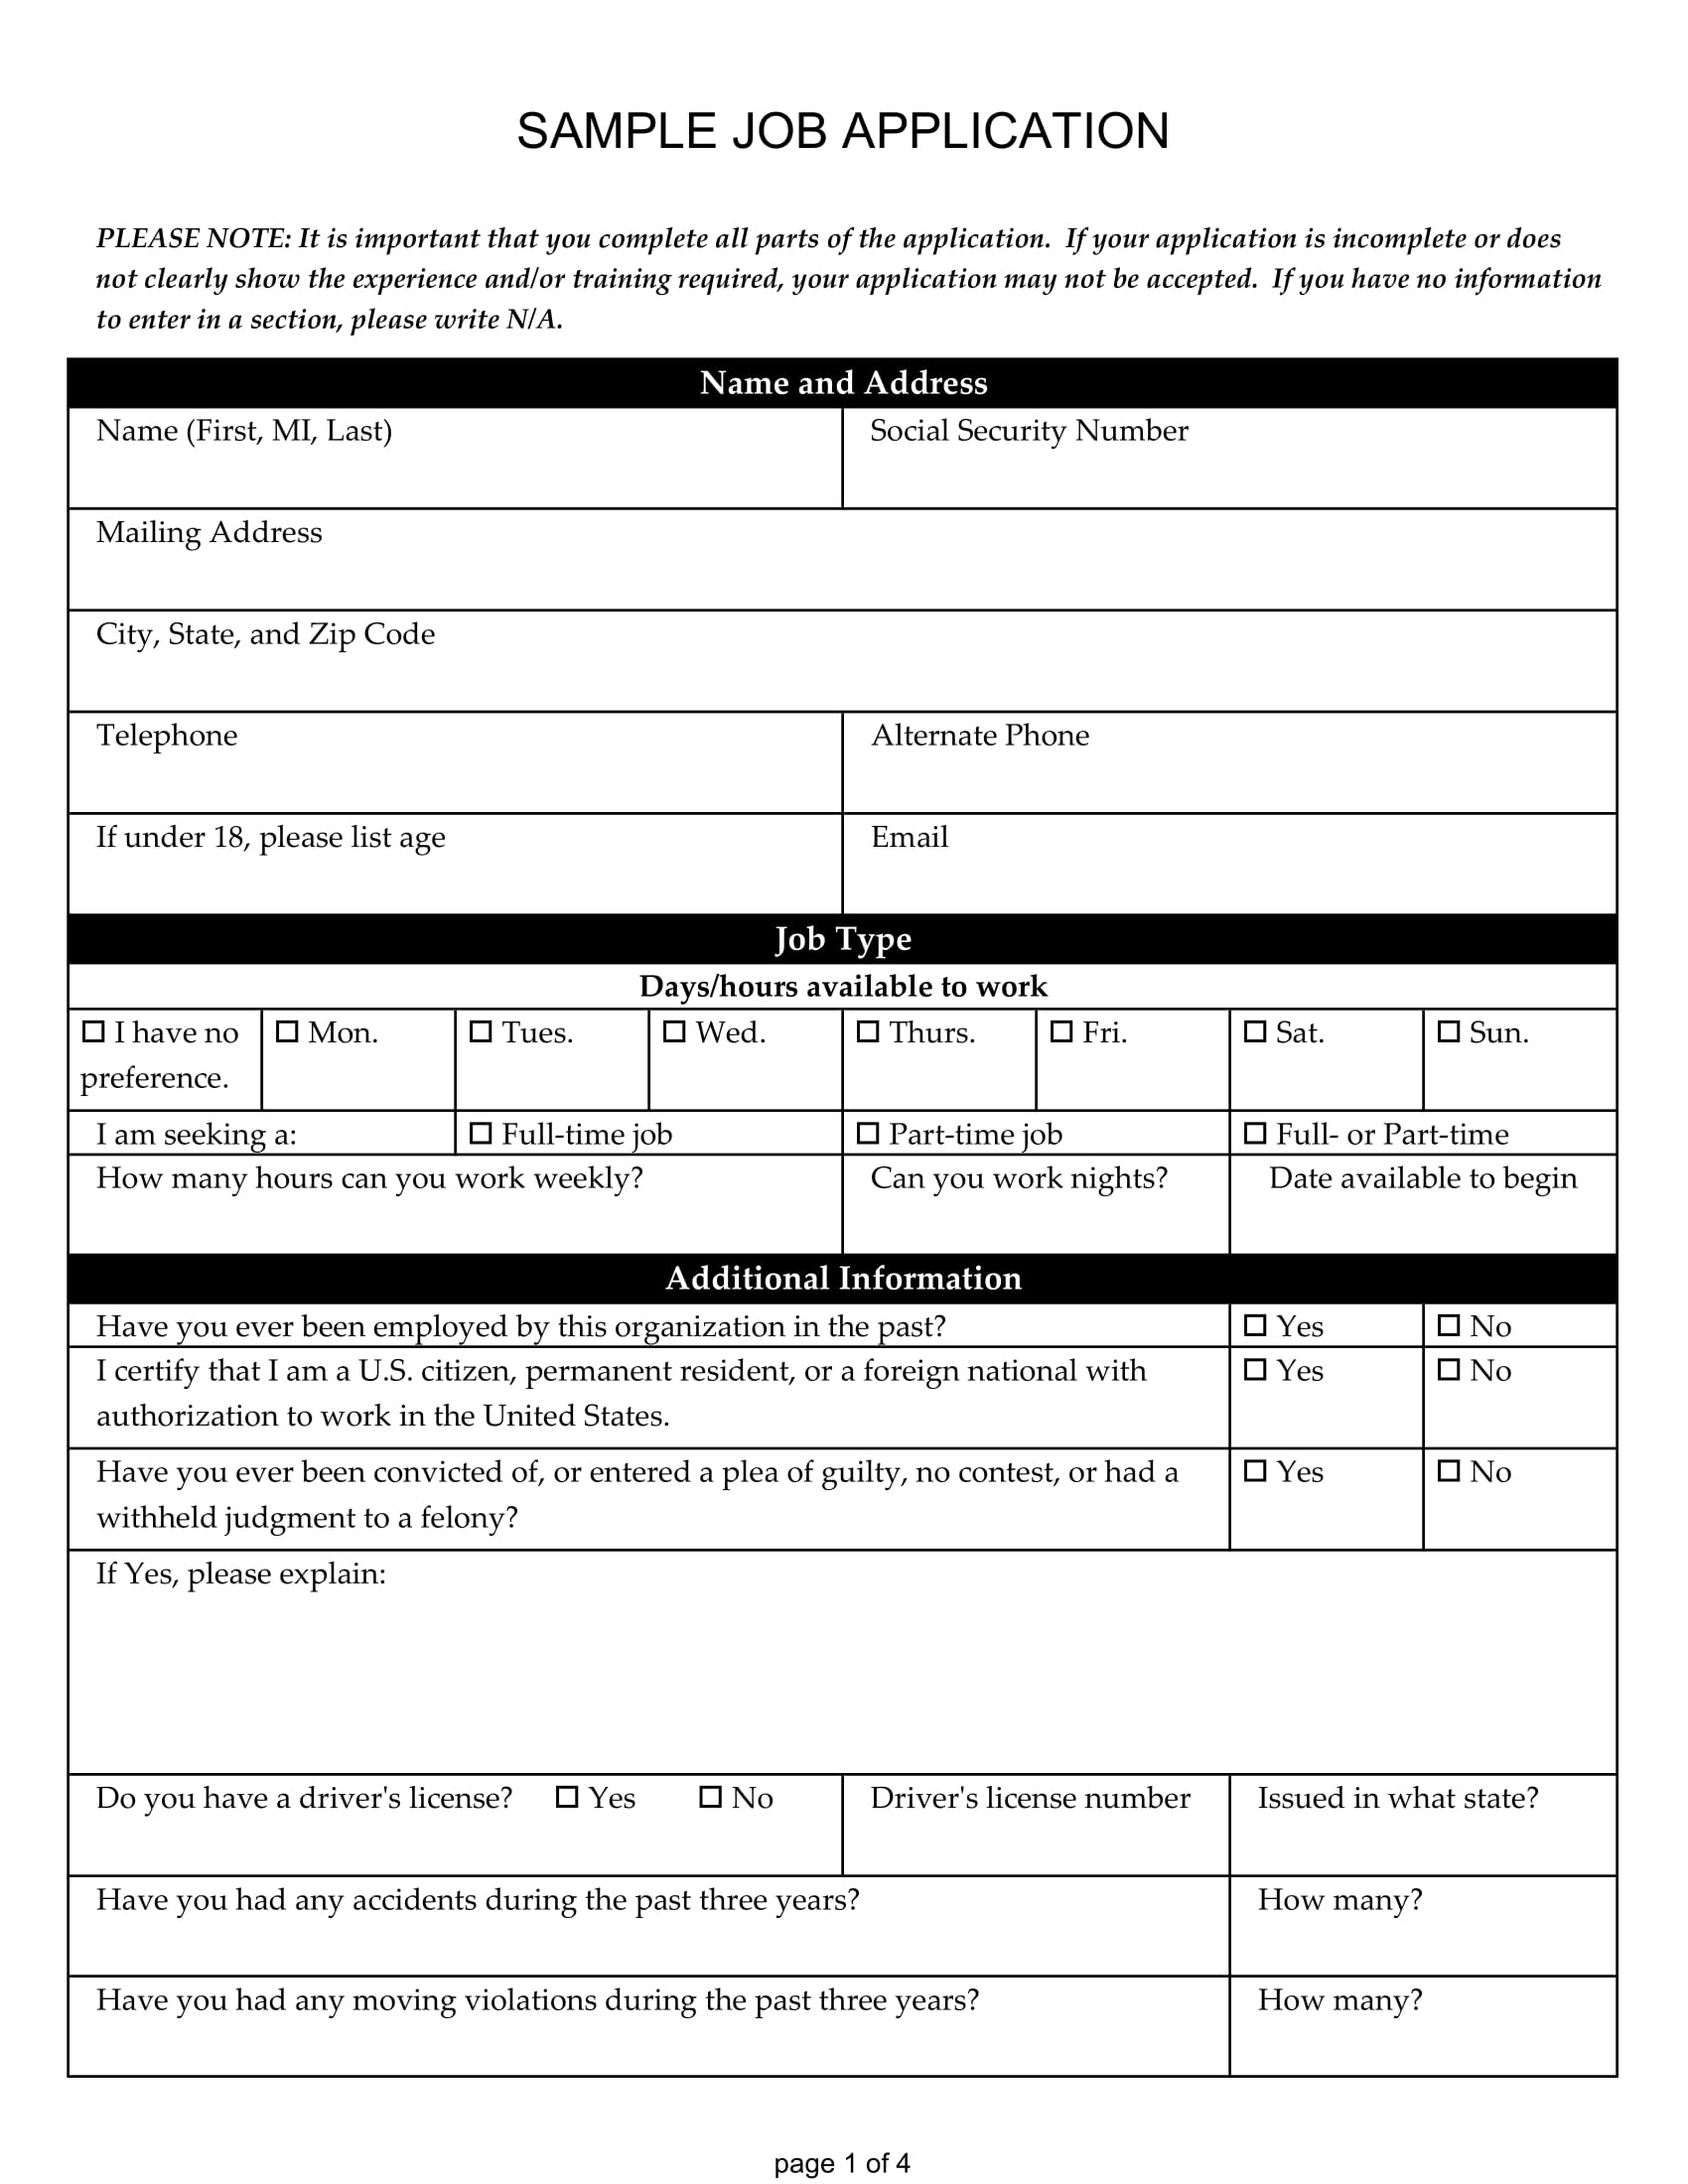 Sample of application form for job vacancy